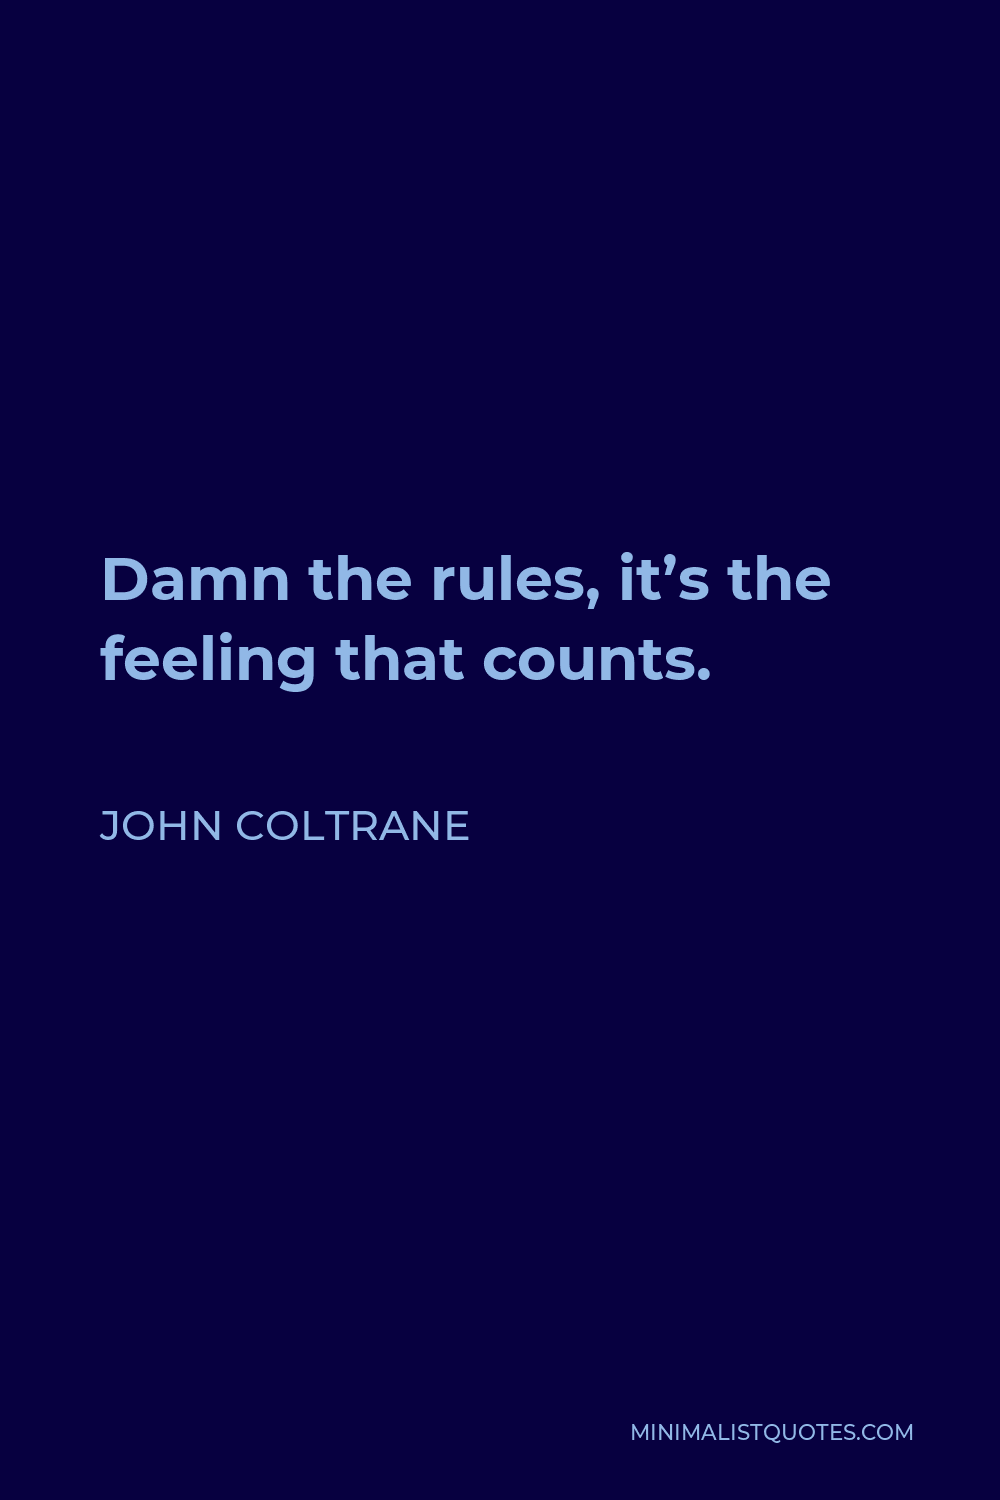 John Coltrane Quote - Damn the rules, it’s the feeling that counts.